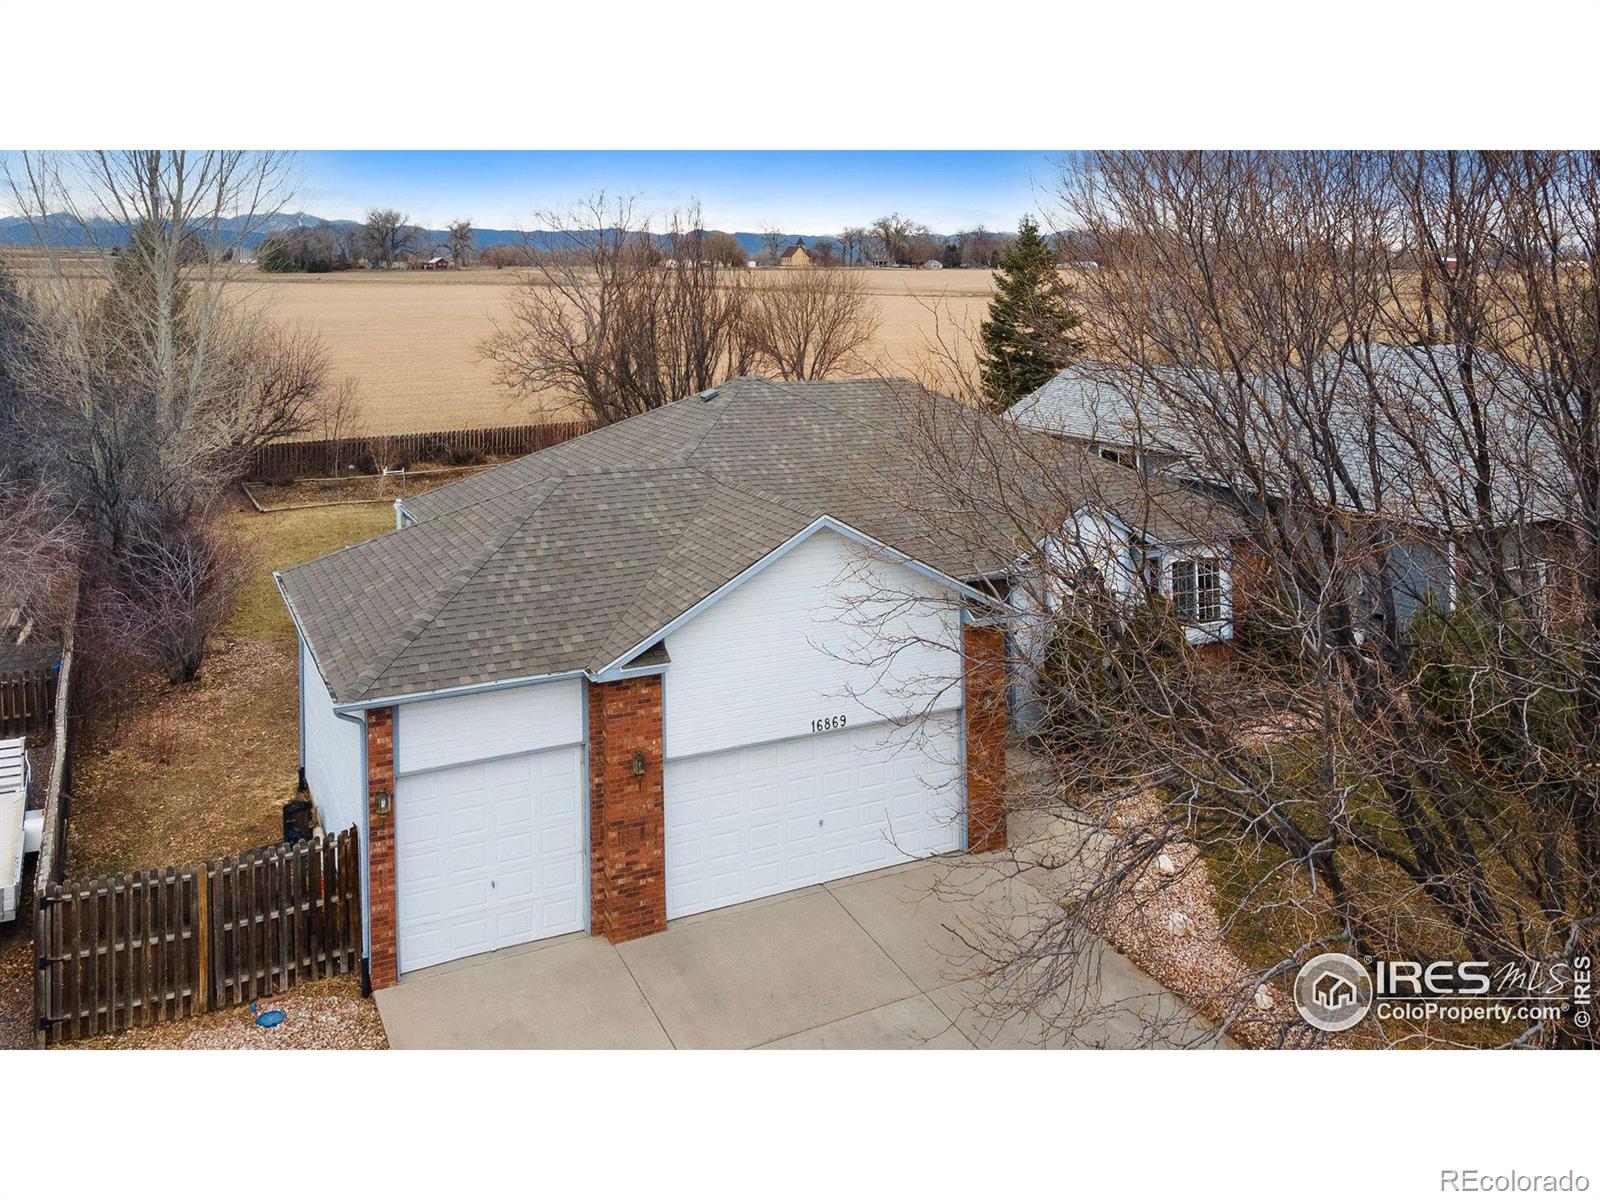 Report Image for 16869 W View Drive,Mead, Colorado